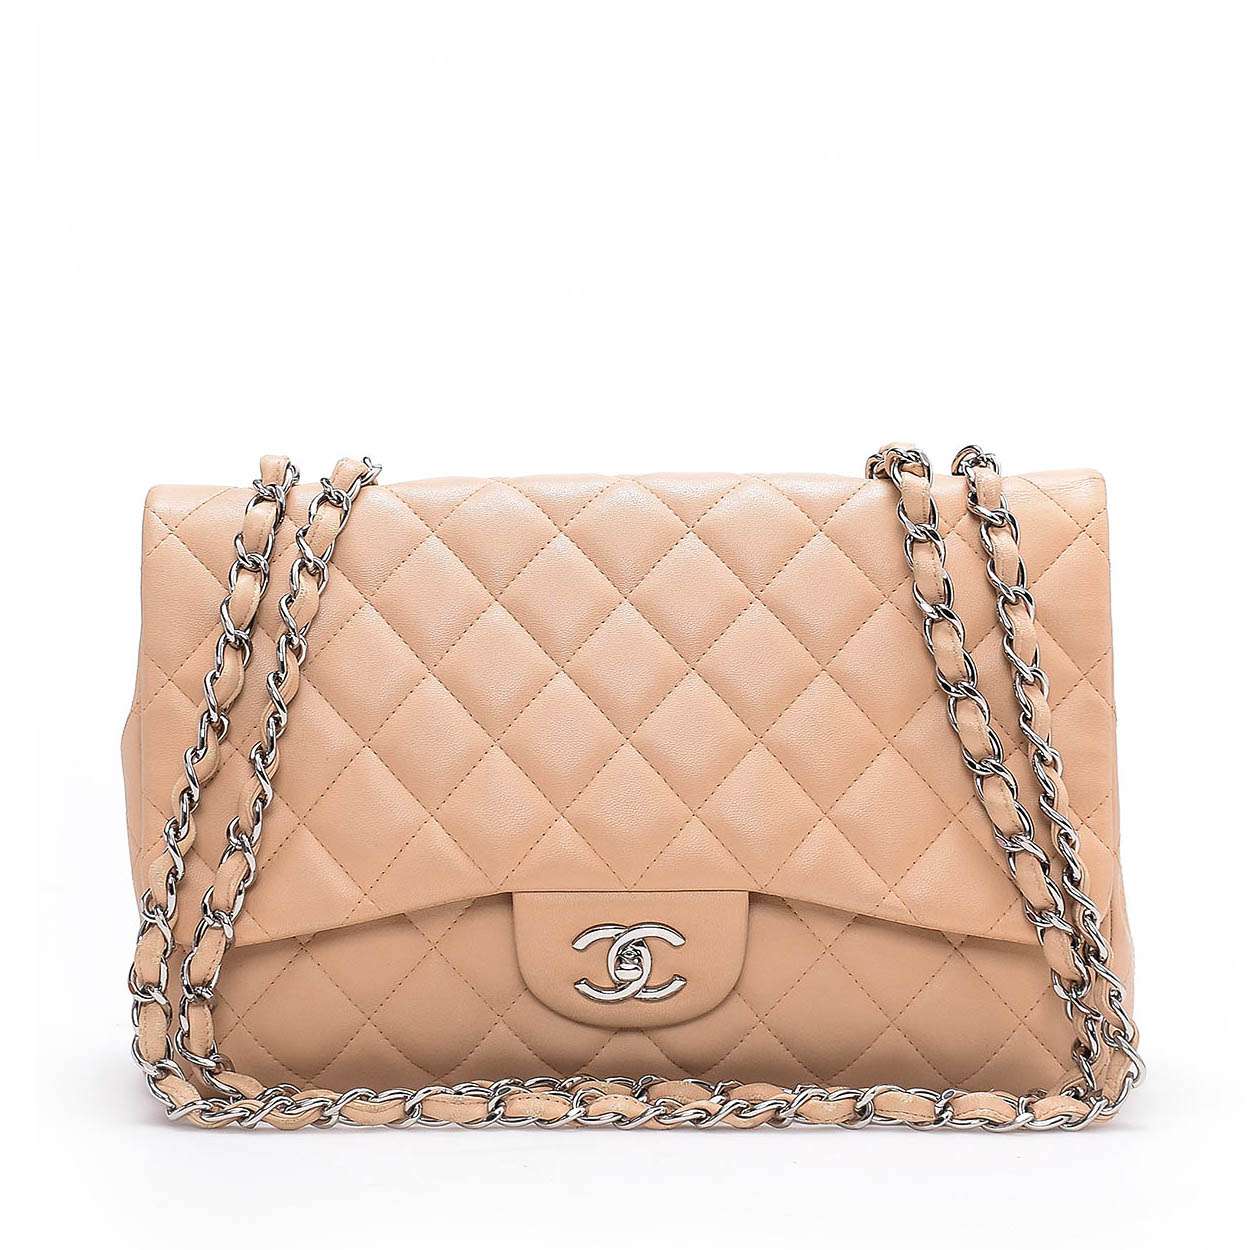 Chanel - Beige  Quilted Lambskin Leather Jumbo Single Flap Bag